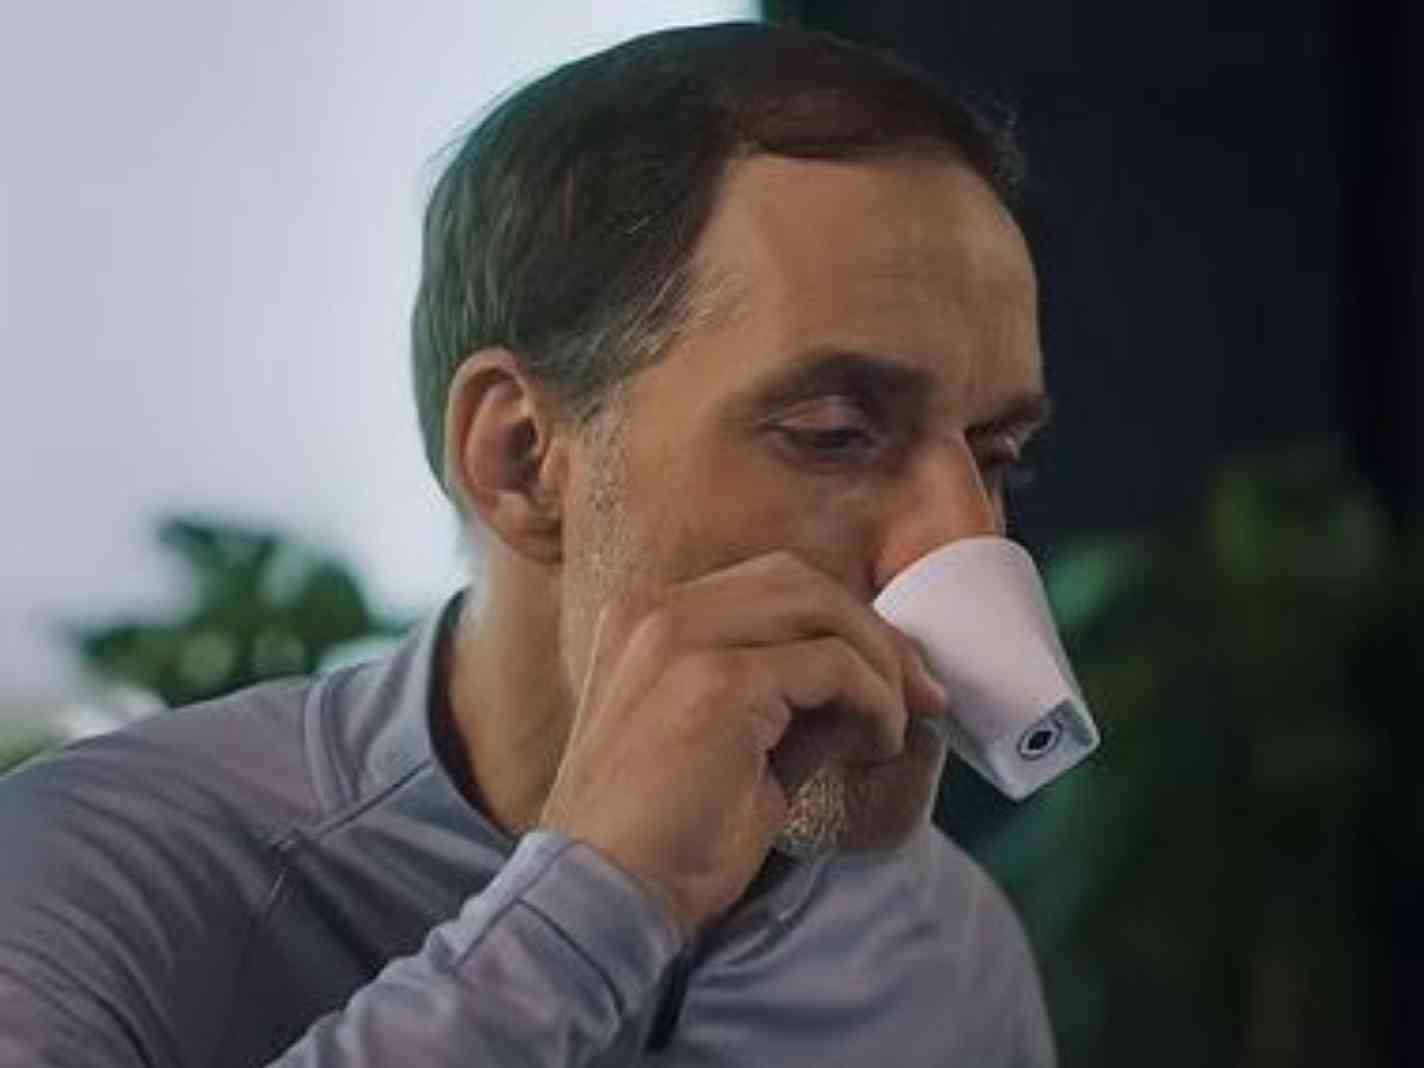 Thomas Tuchel sipping coffee in latest advert for Trivago.